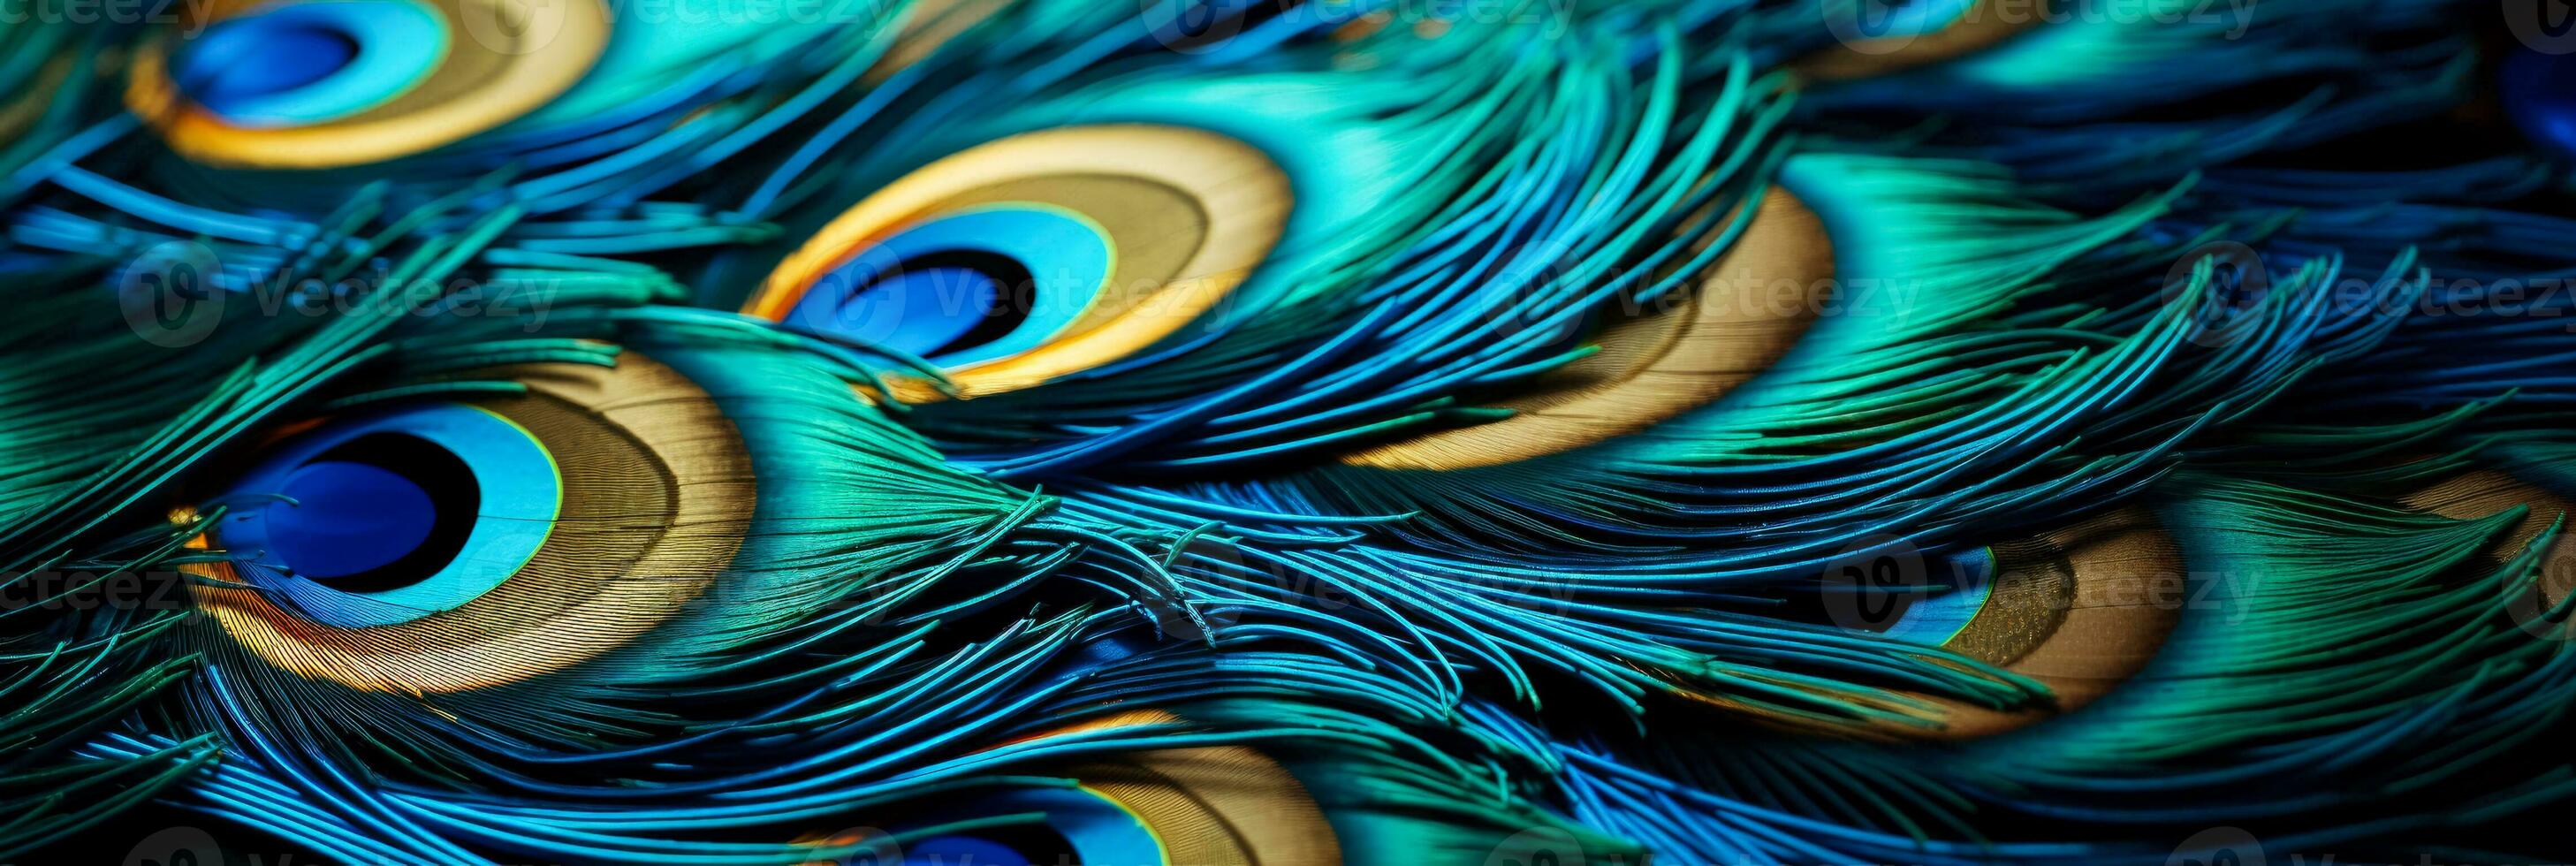 Macro shot emphasising the intricate threadwork on peacock feather embroidery photo